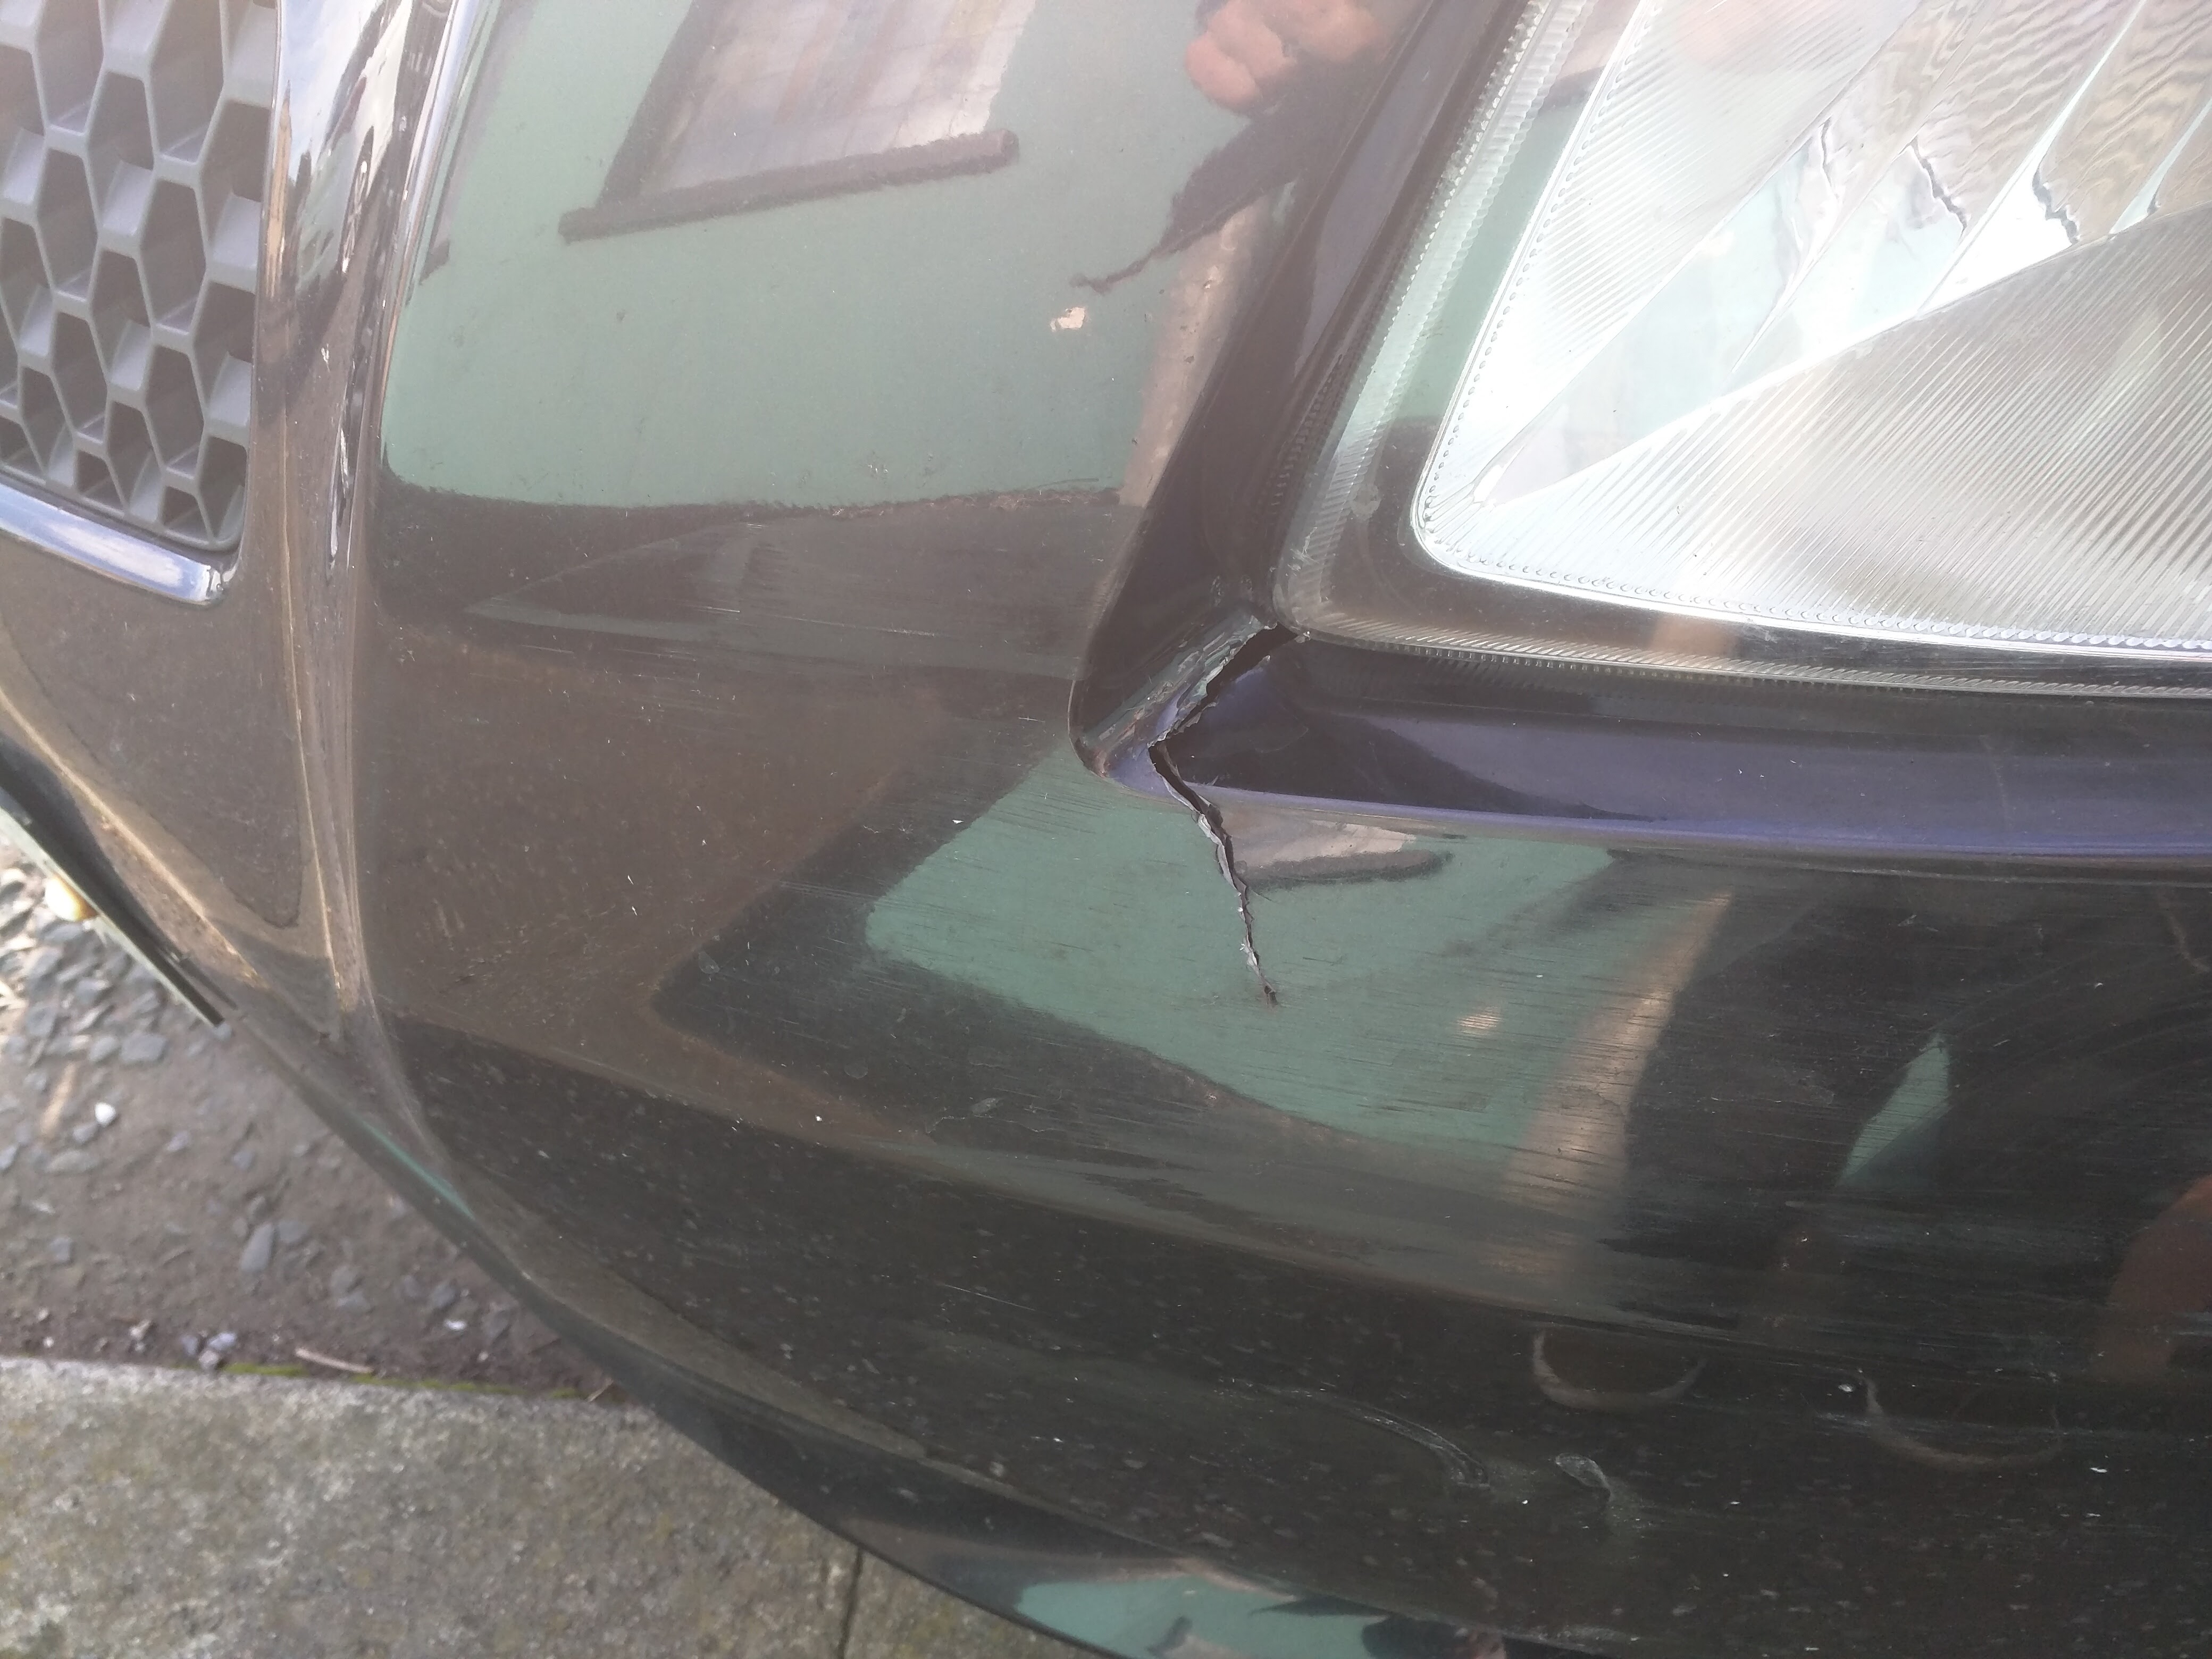 Cost to fix this damage? Yaris Club Toyota Owners Club